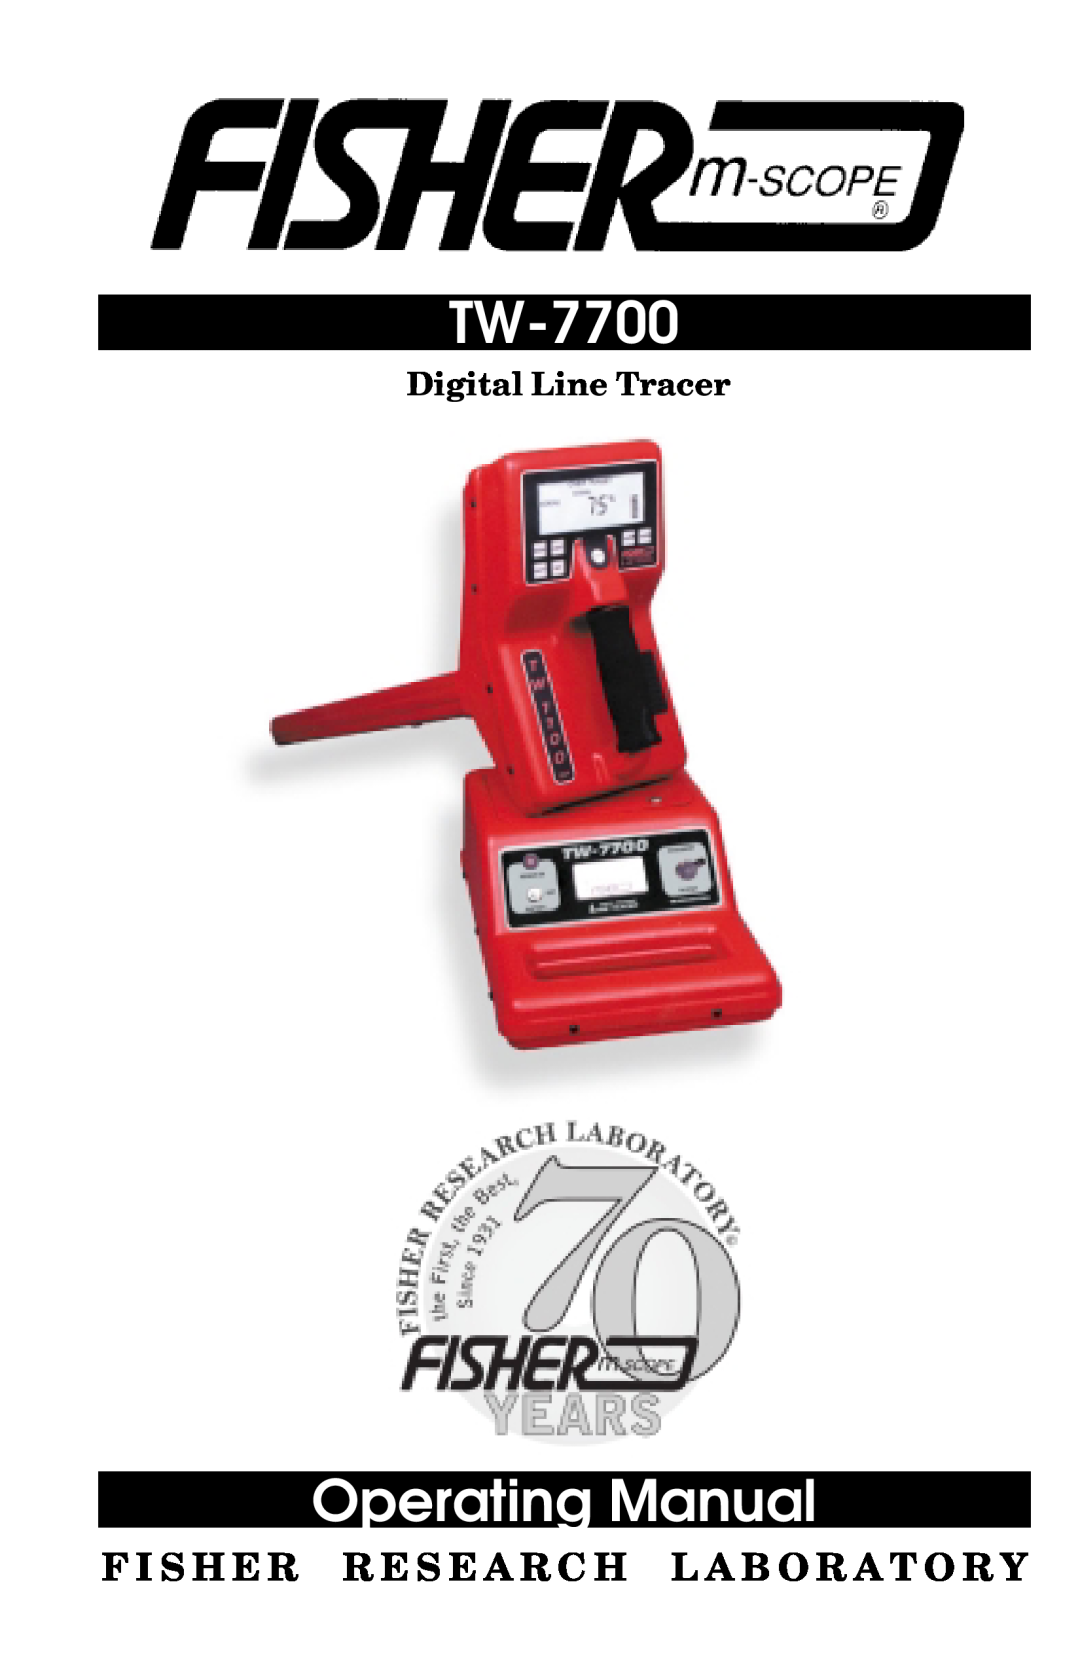 Fisher TW-7700 manual Operating Manual, F I S H E R R E S E A R C H L A B O R A T O R Y, Digital Line Tracer 